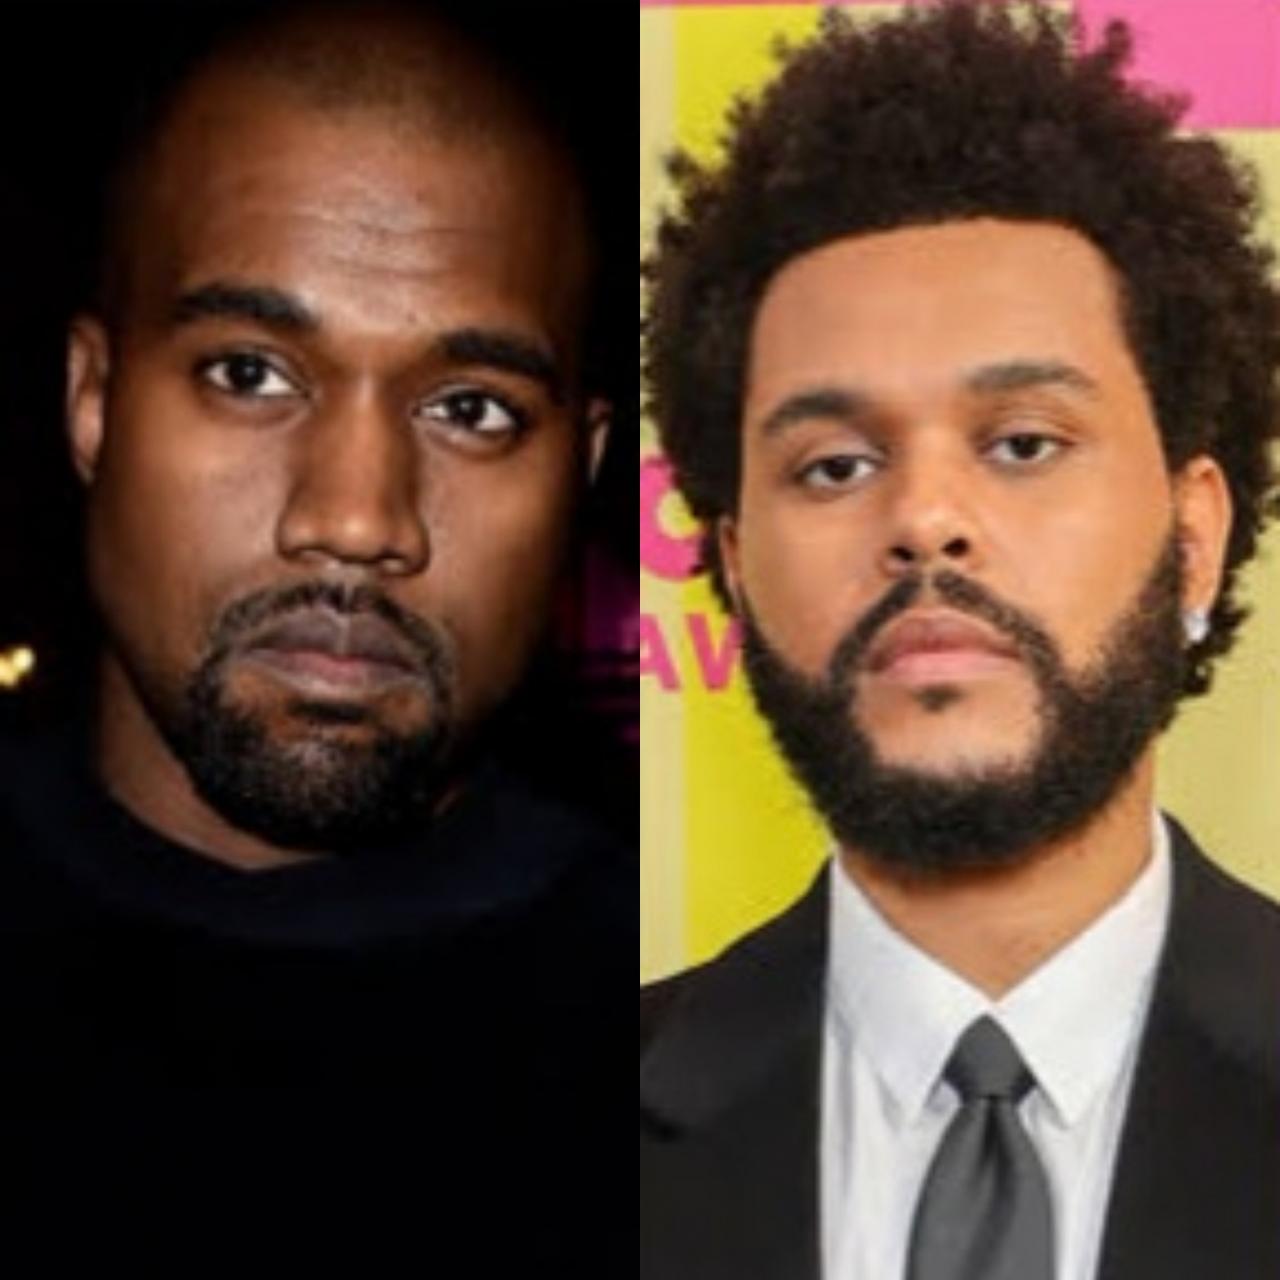 The Weeknd threatens to pull out of coachella unless he gets the same pay as Kanye West